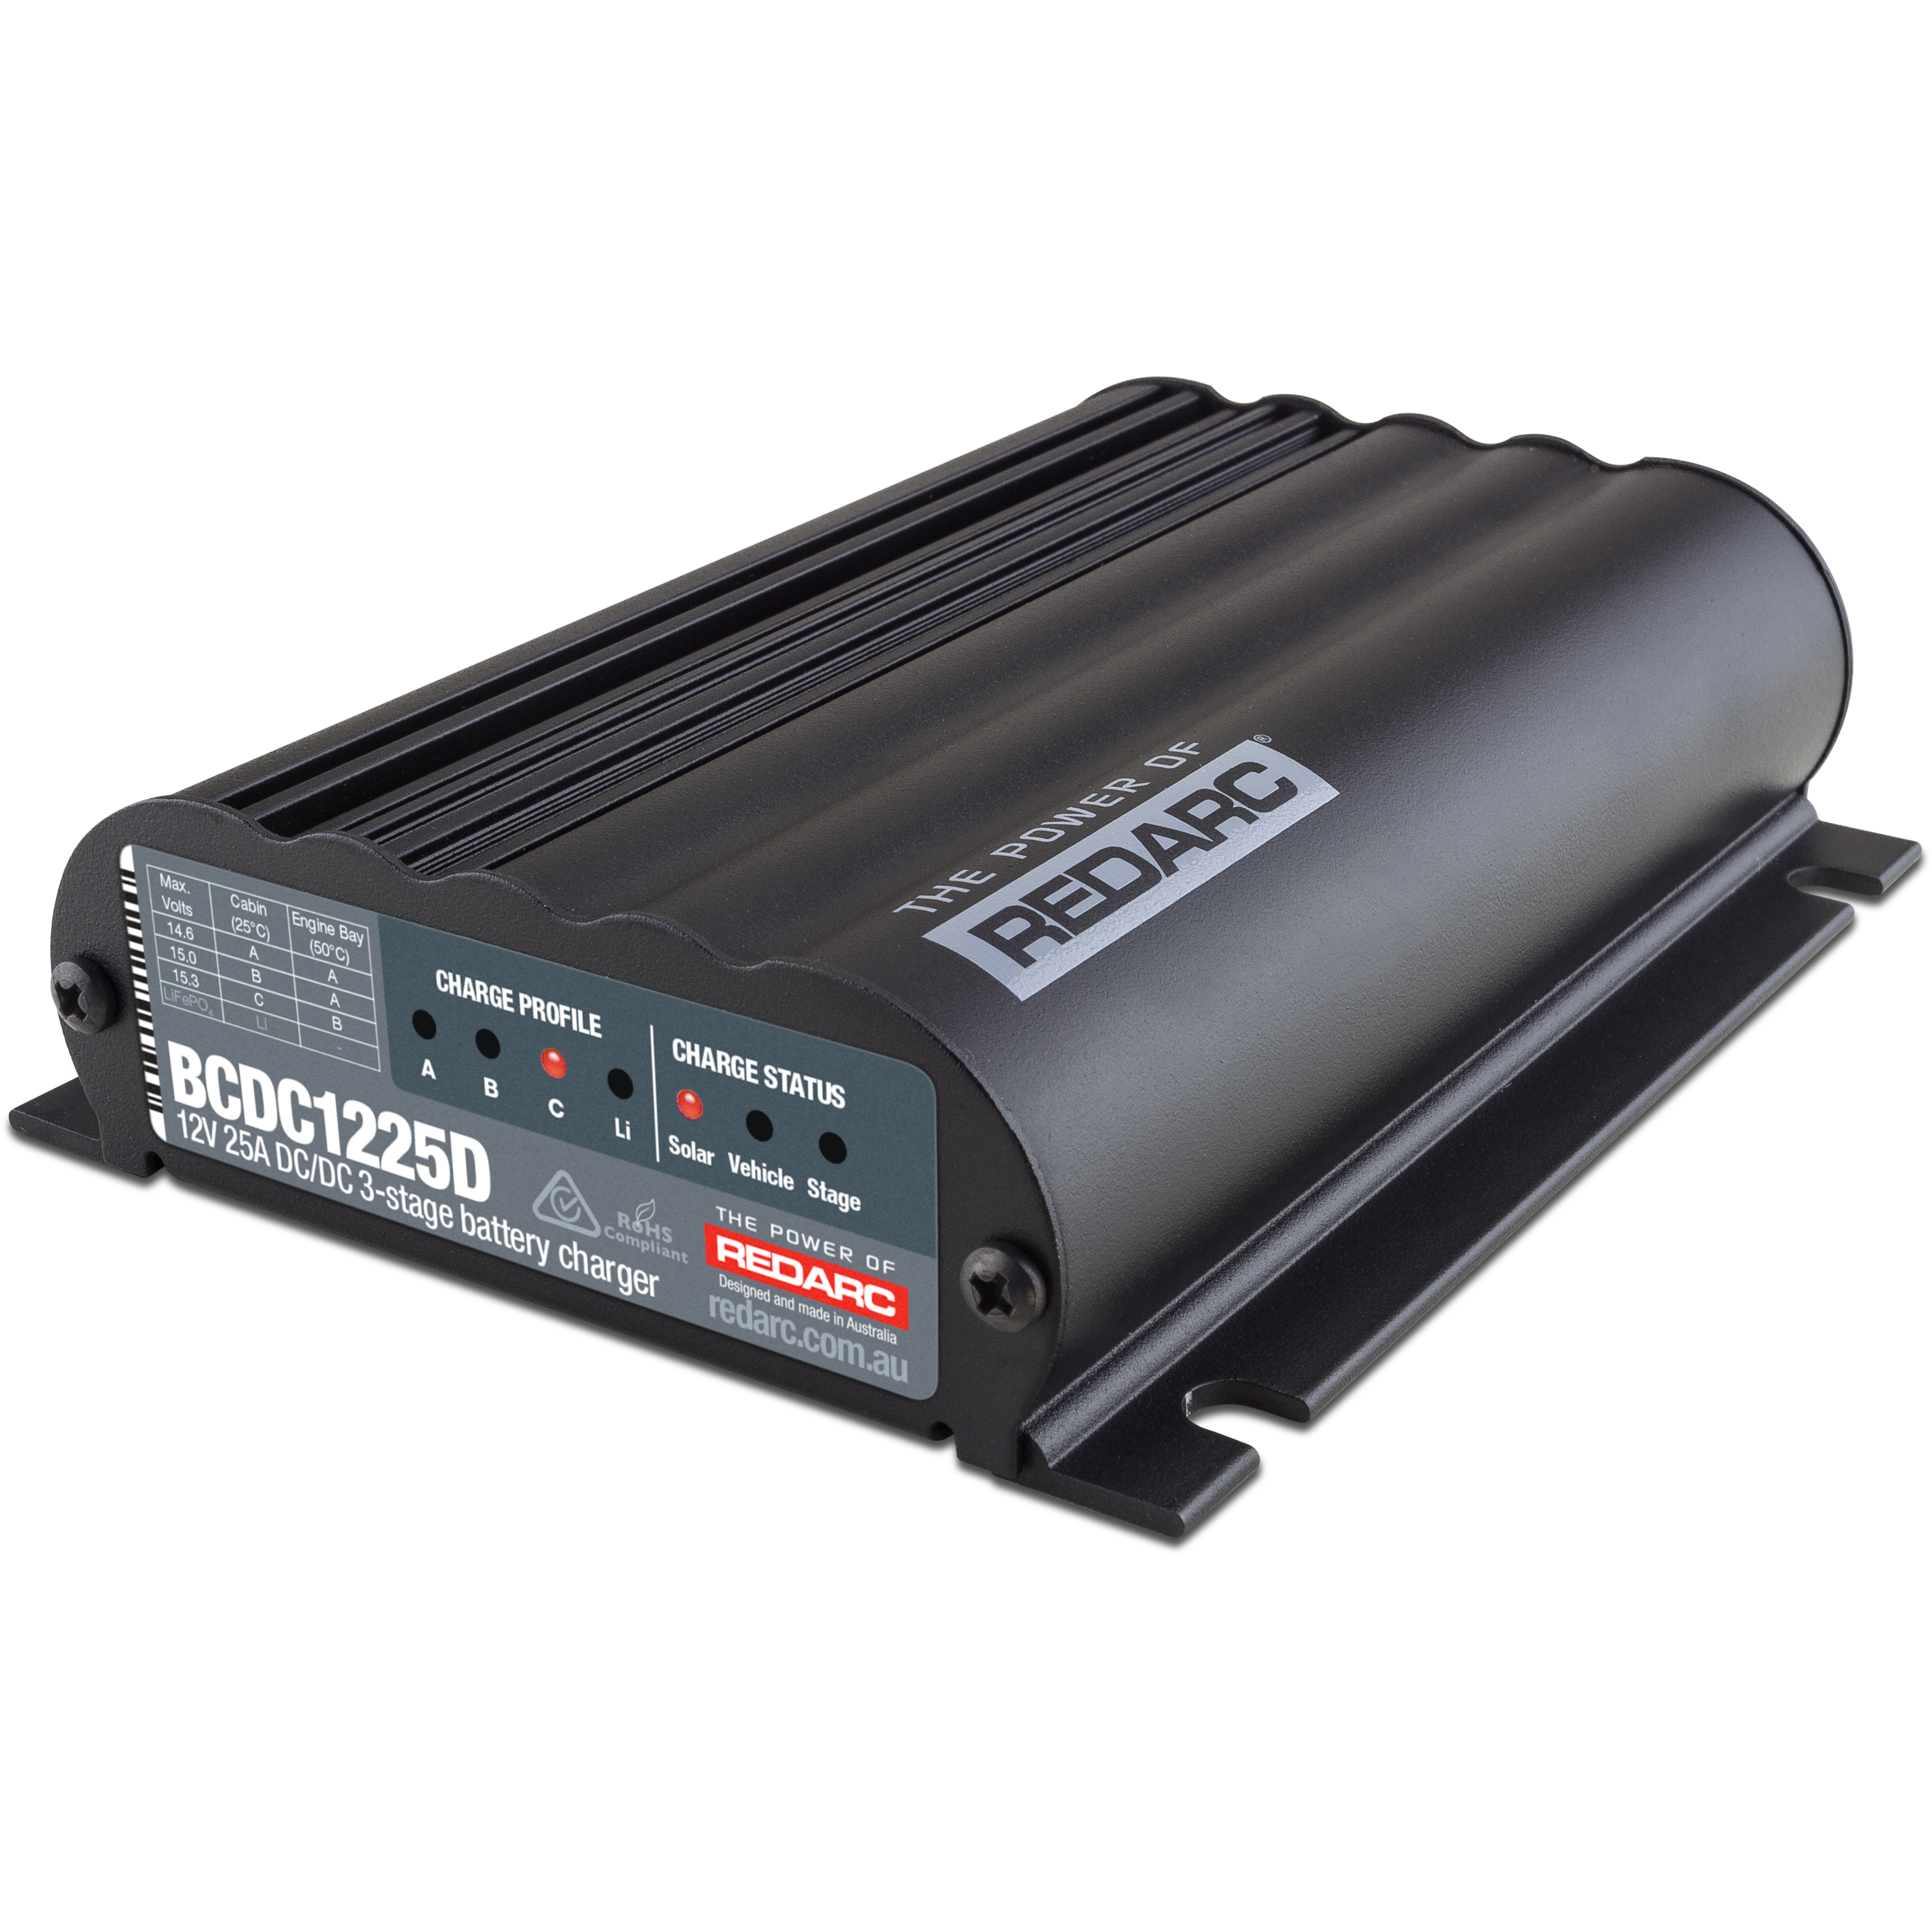 REDARC DC/DC IN-Vehicle DC Battery Charger 25A BCDC1225D